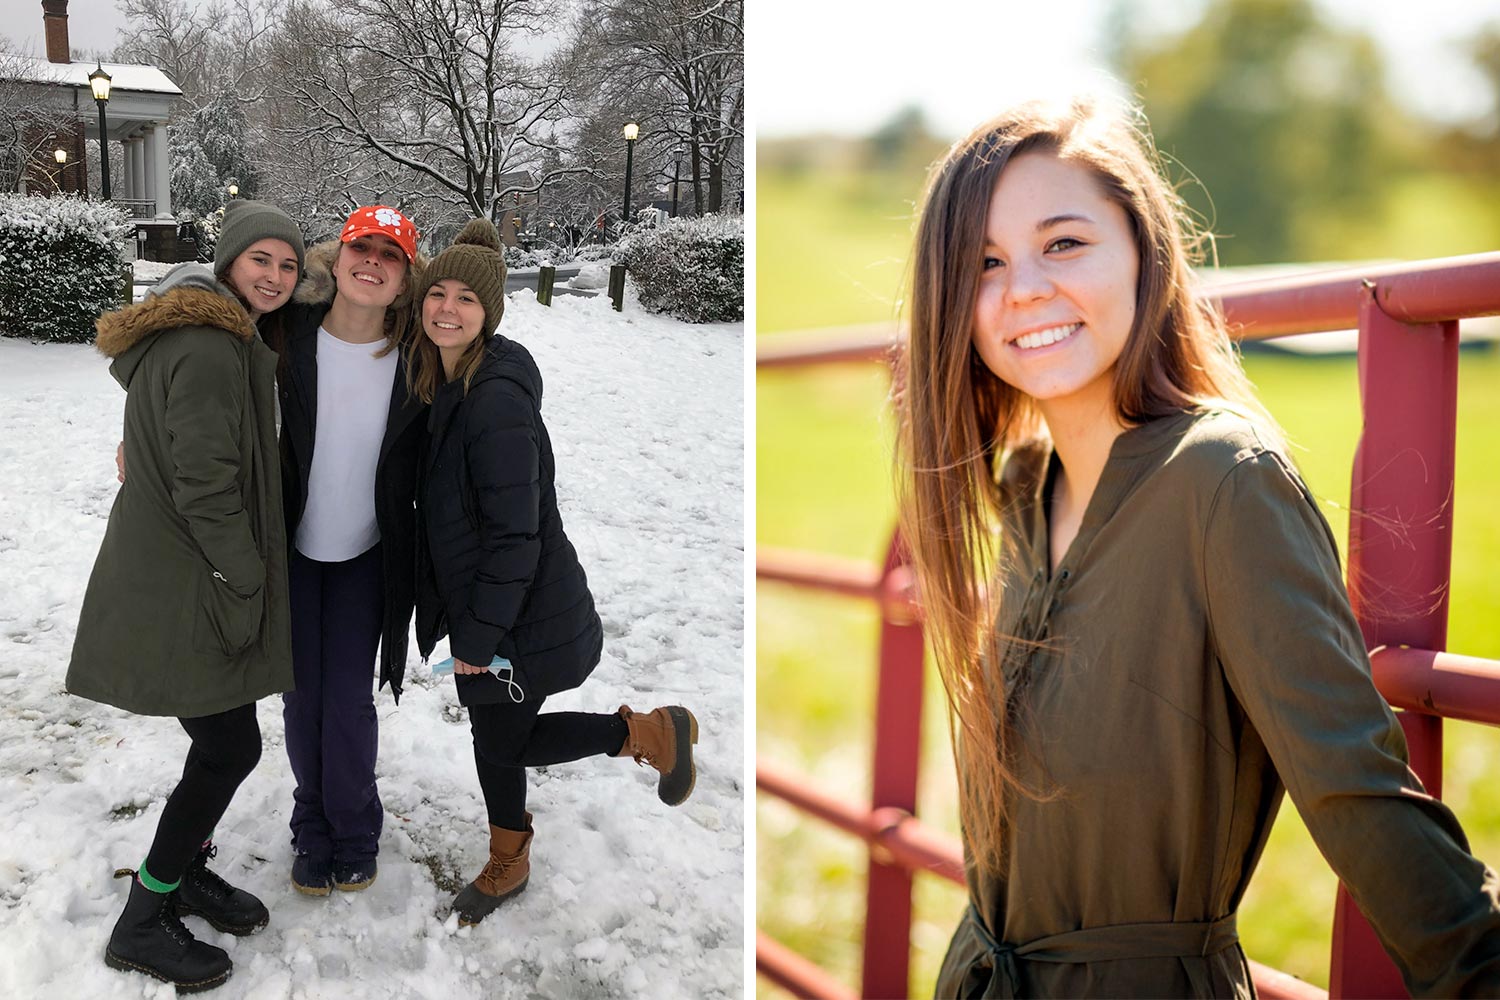 Left: Millie Gidley Rice  with two friends in the snow. Right: Millie Gidley Rice  headshot